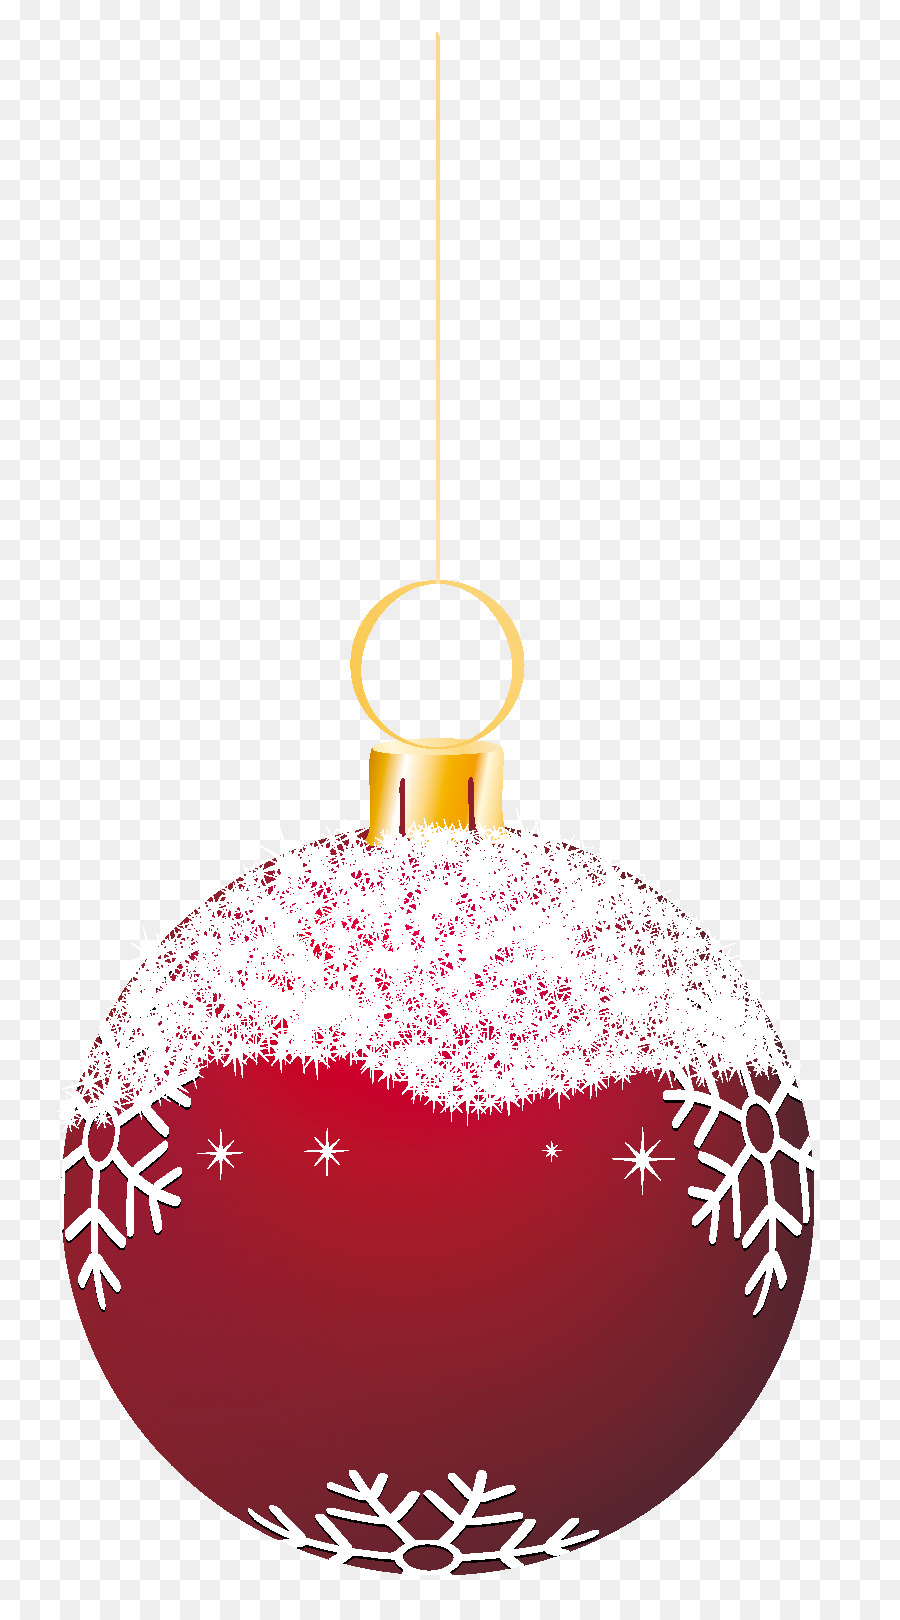 Download christmas ball ornaments png clipart Christmas ornament.